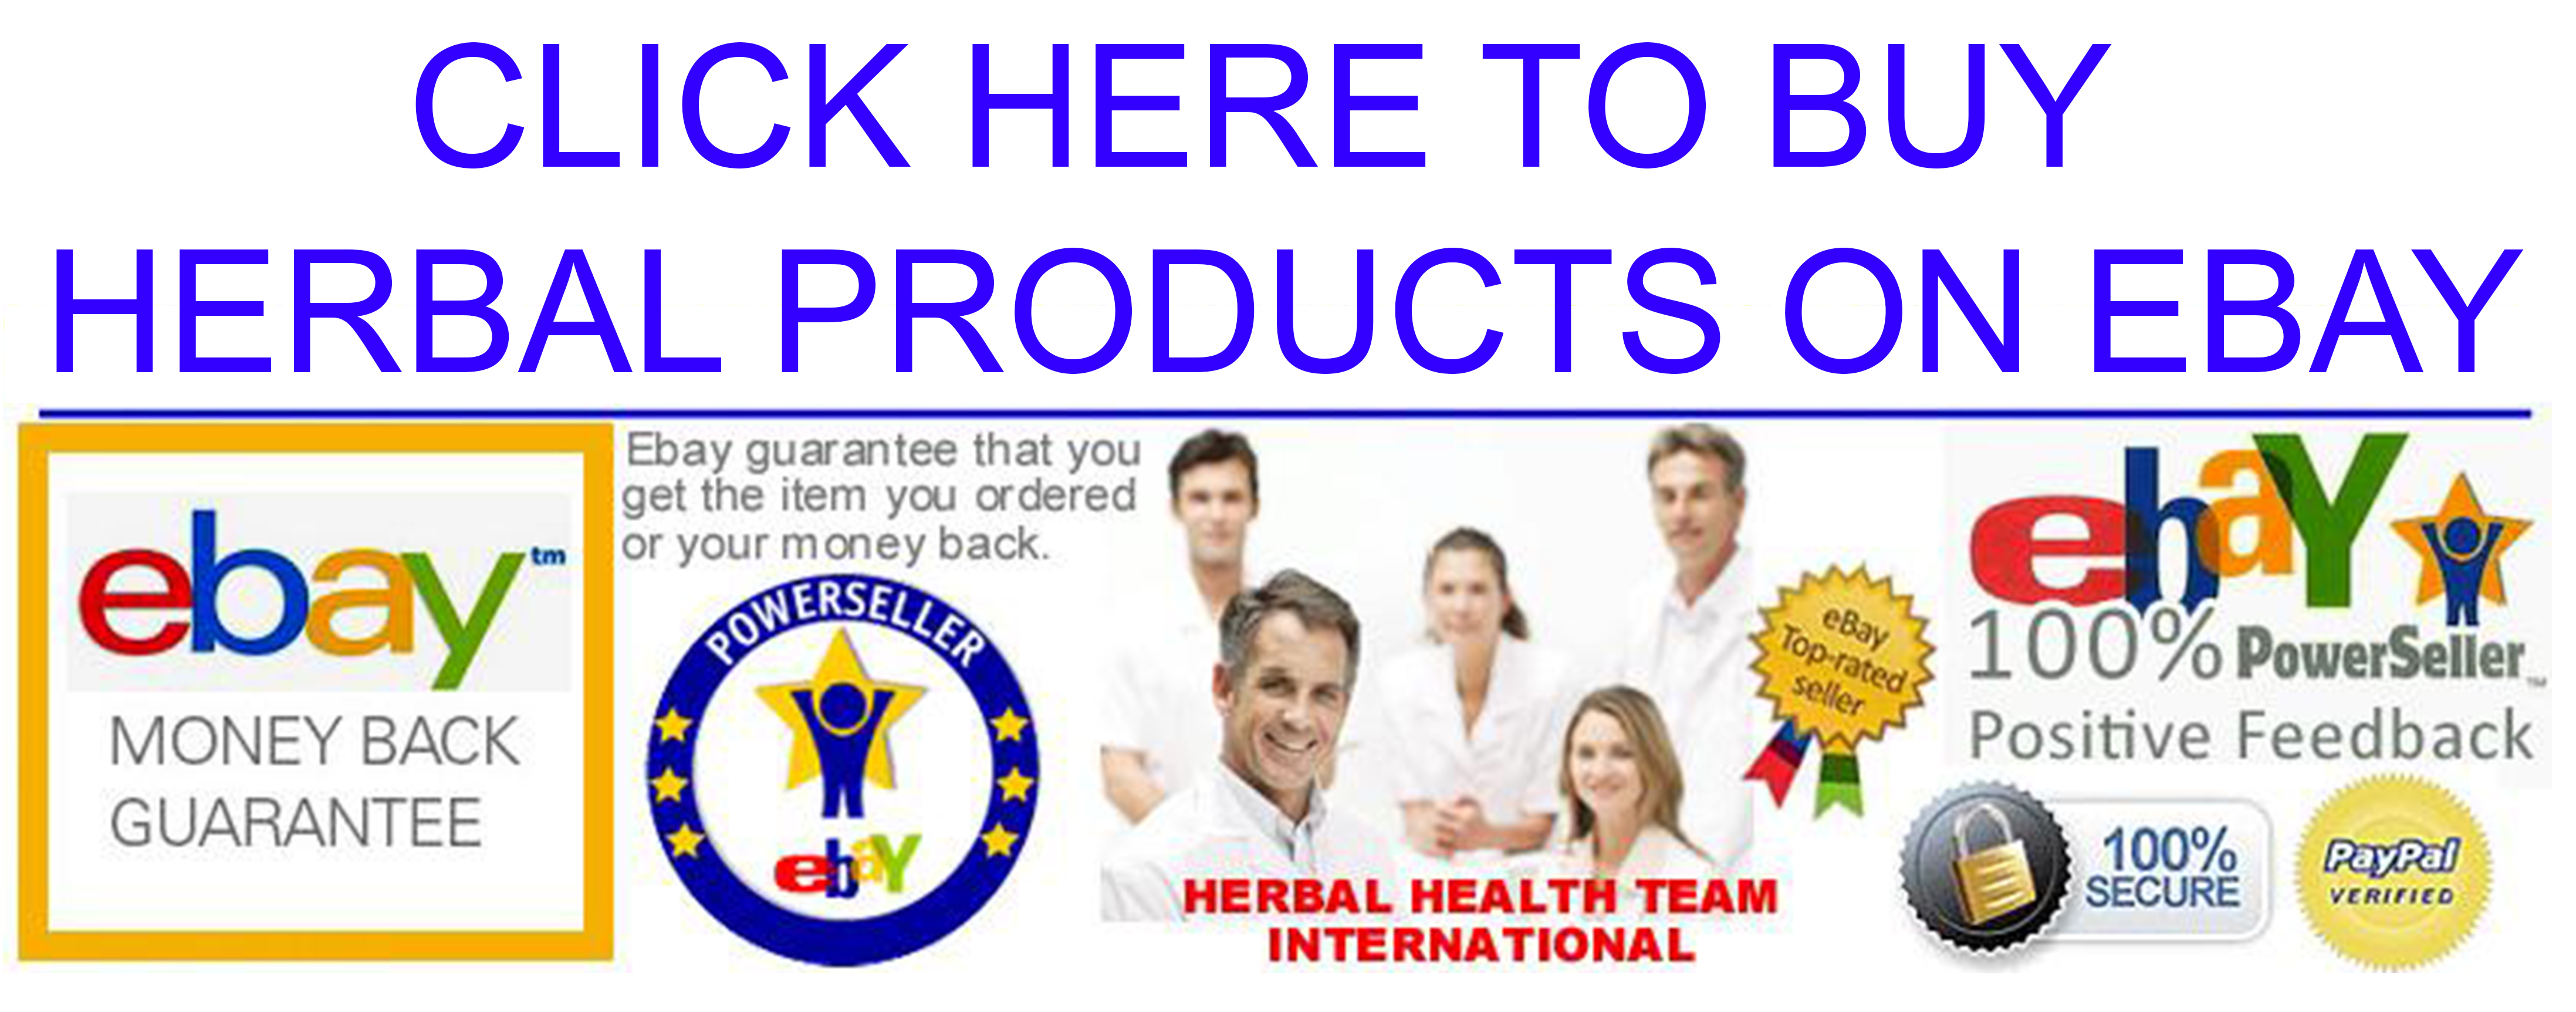 Buy herbal products on eBay